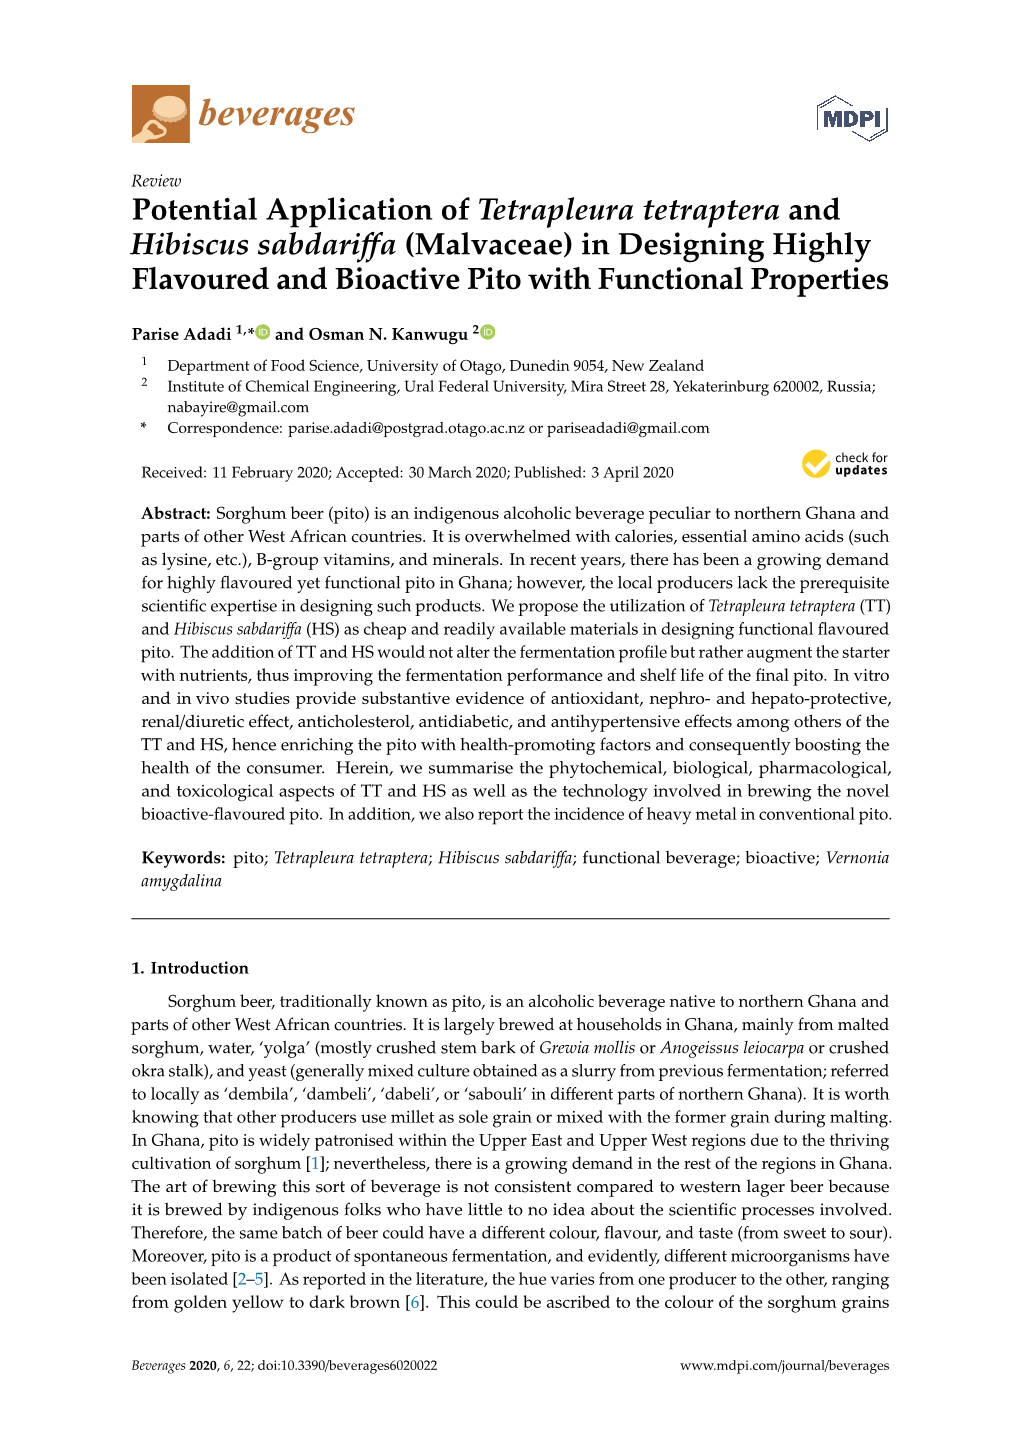 Potential Application of Tetrapleura Tetraptera and Hibiscus Sabdariffa (Malvaceae) in Designing Highly Flavoured and Bioactive